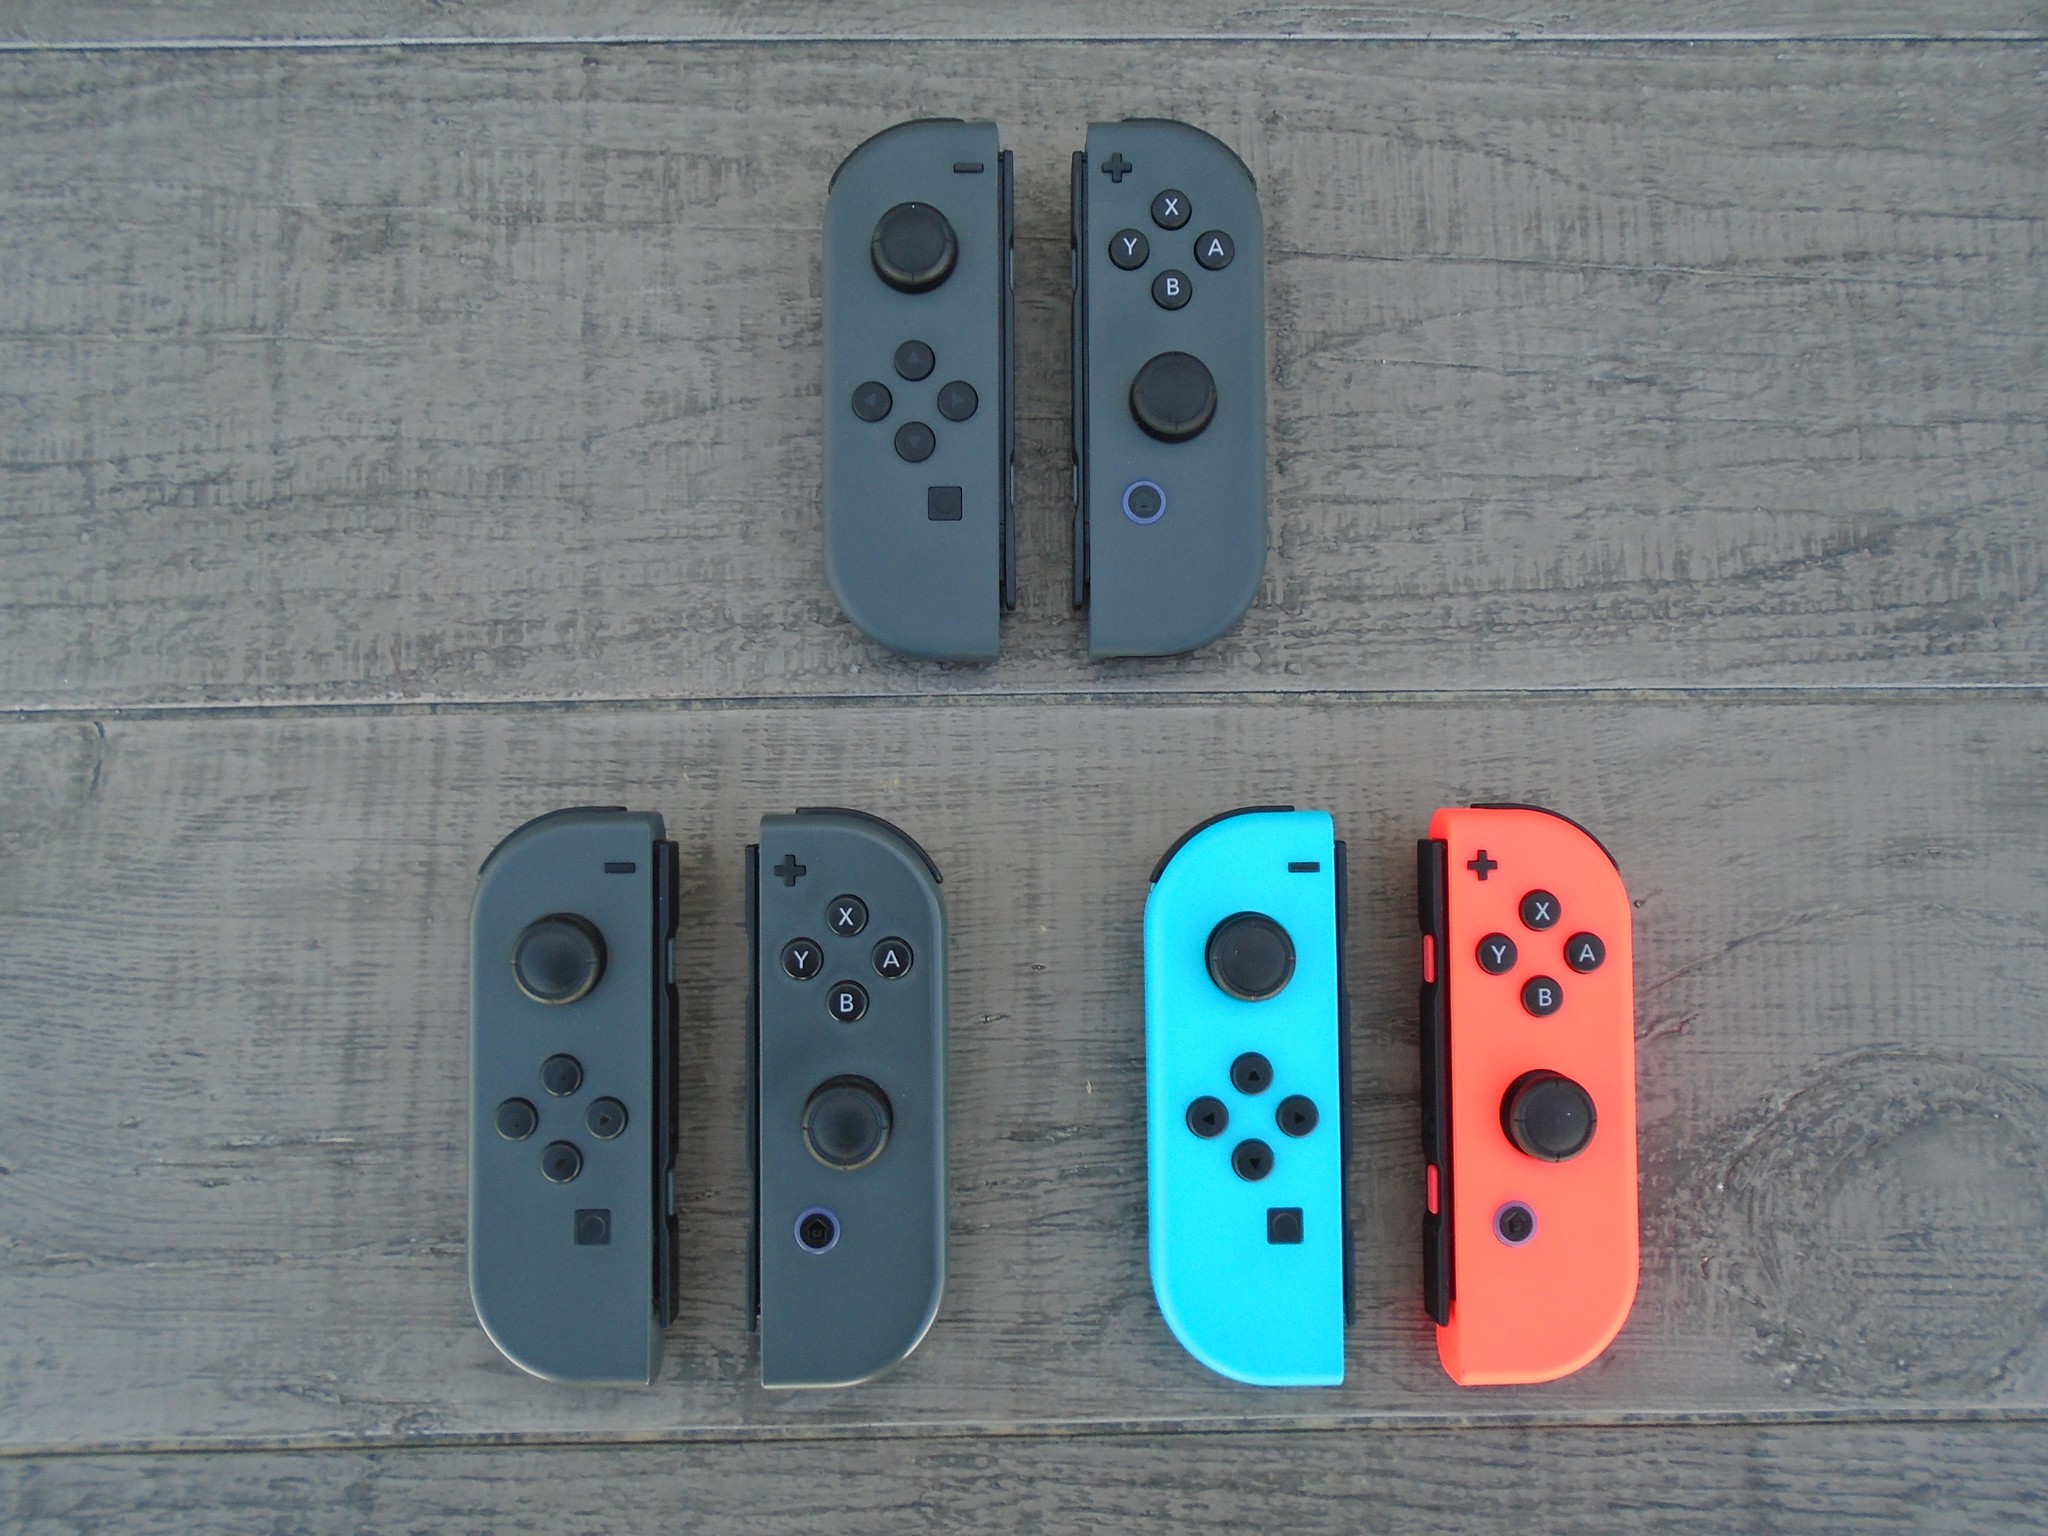 Two Gray Joy-Con pairs, and Neon Red Blue Joy-Cons